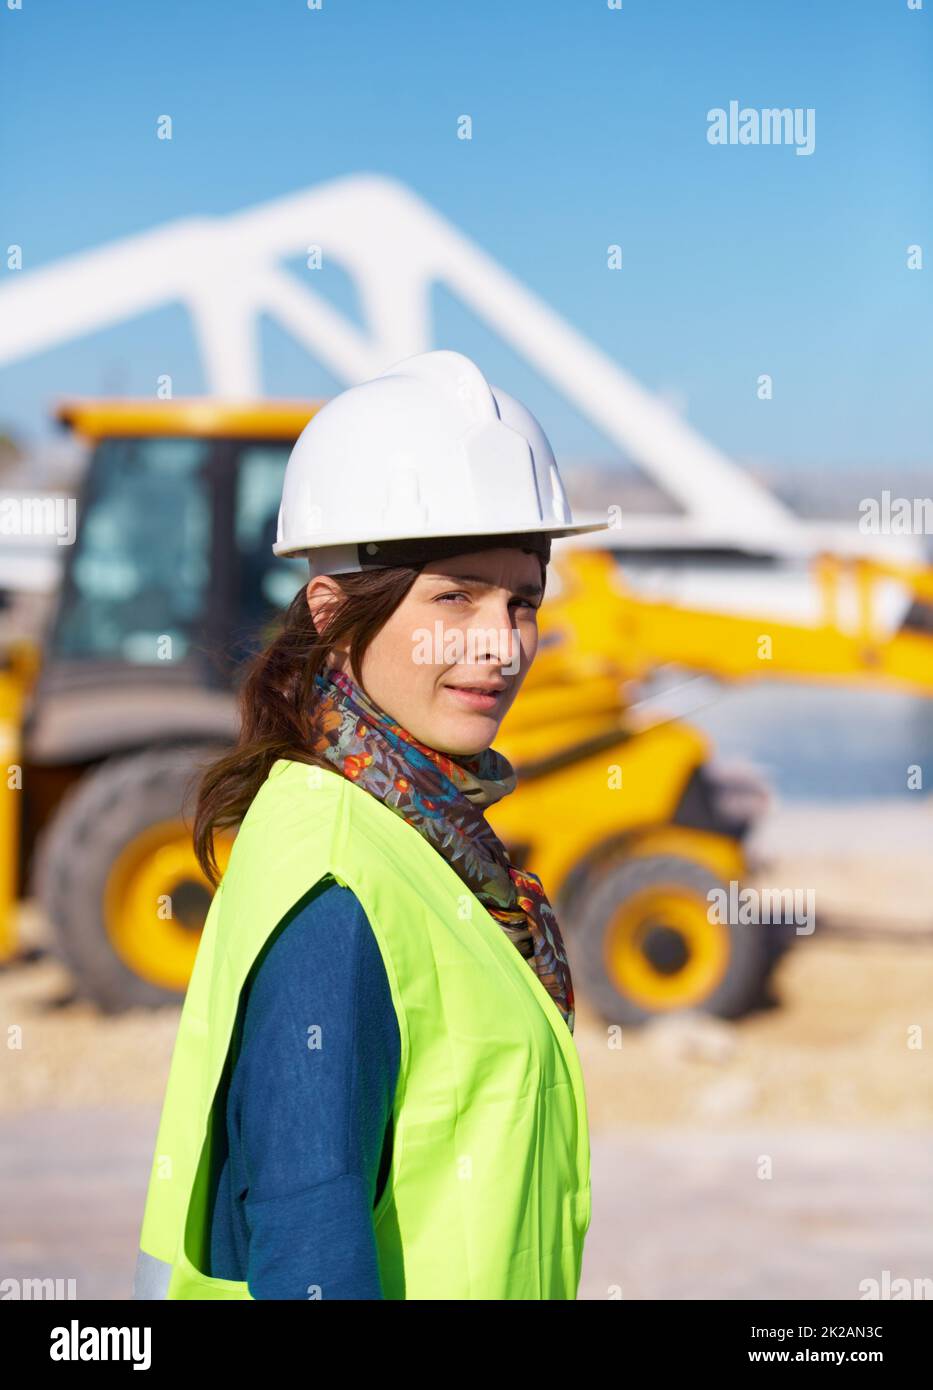 Im the foreWOMAN. Portrait of an attractive young construction worker on site. Stock Photo